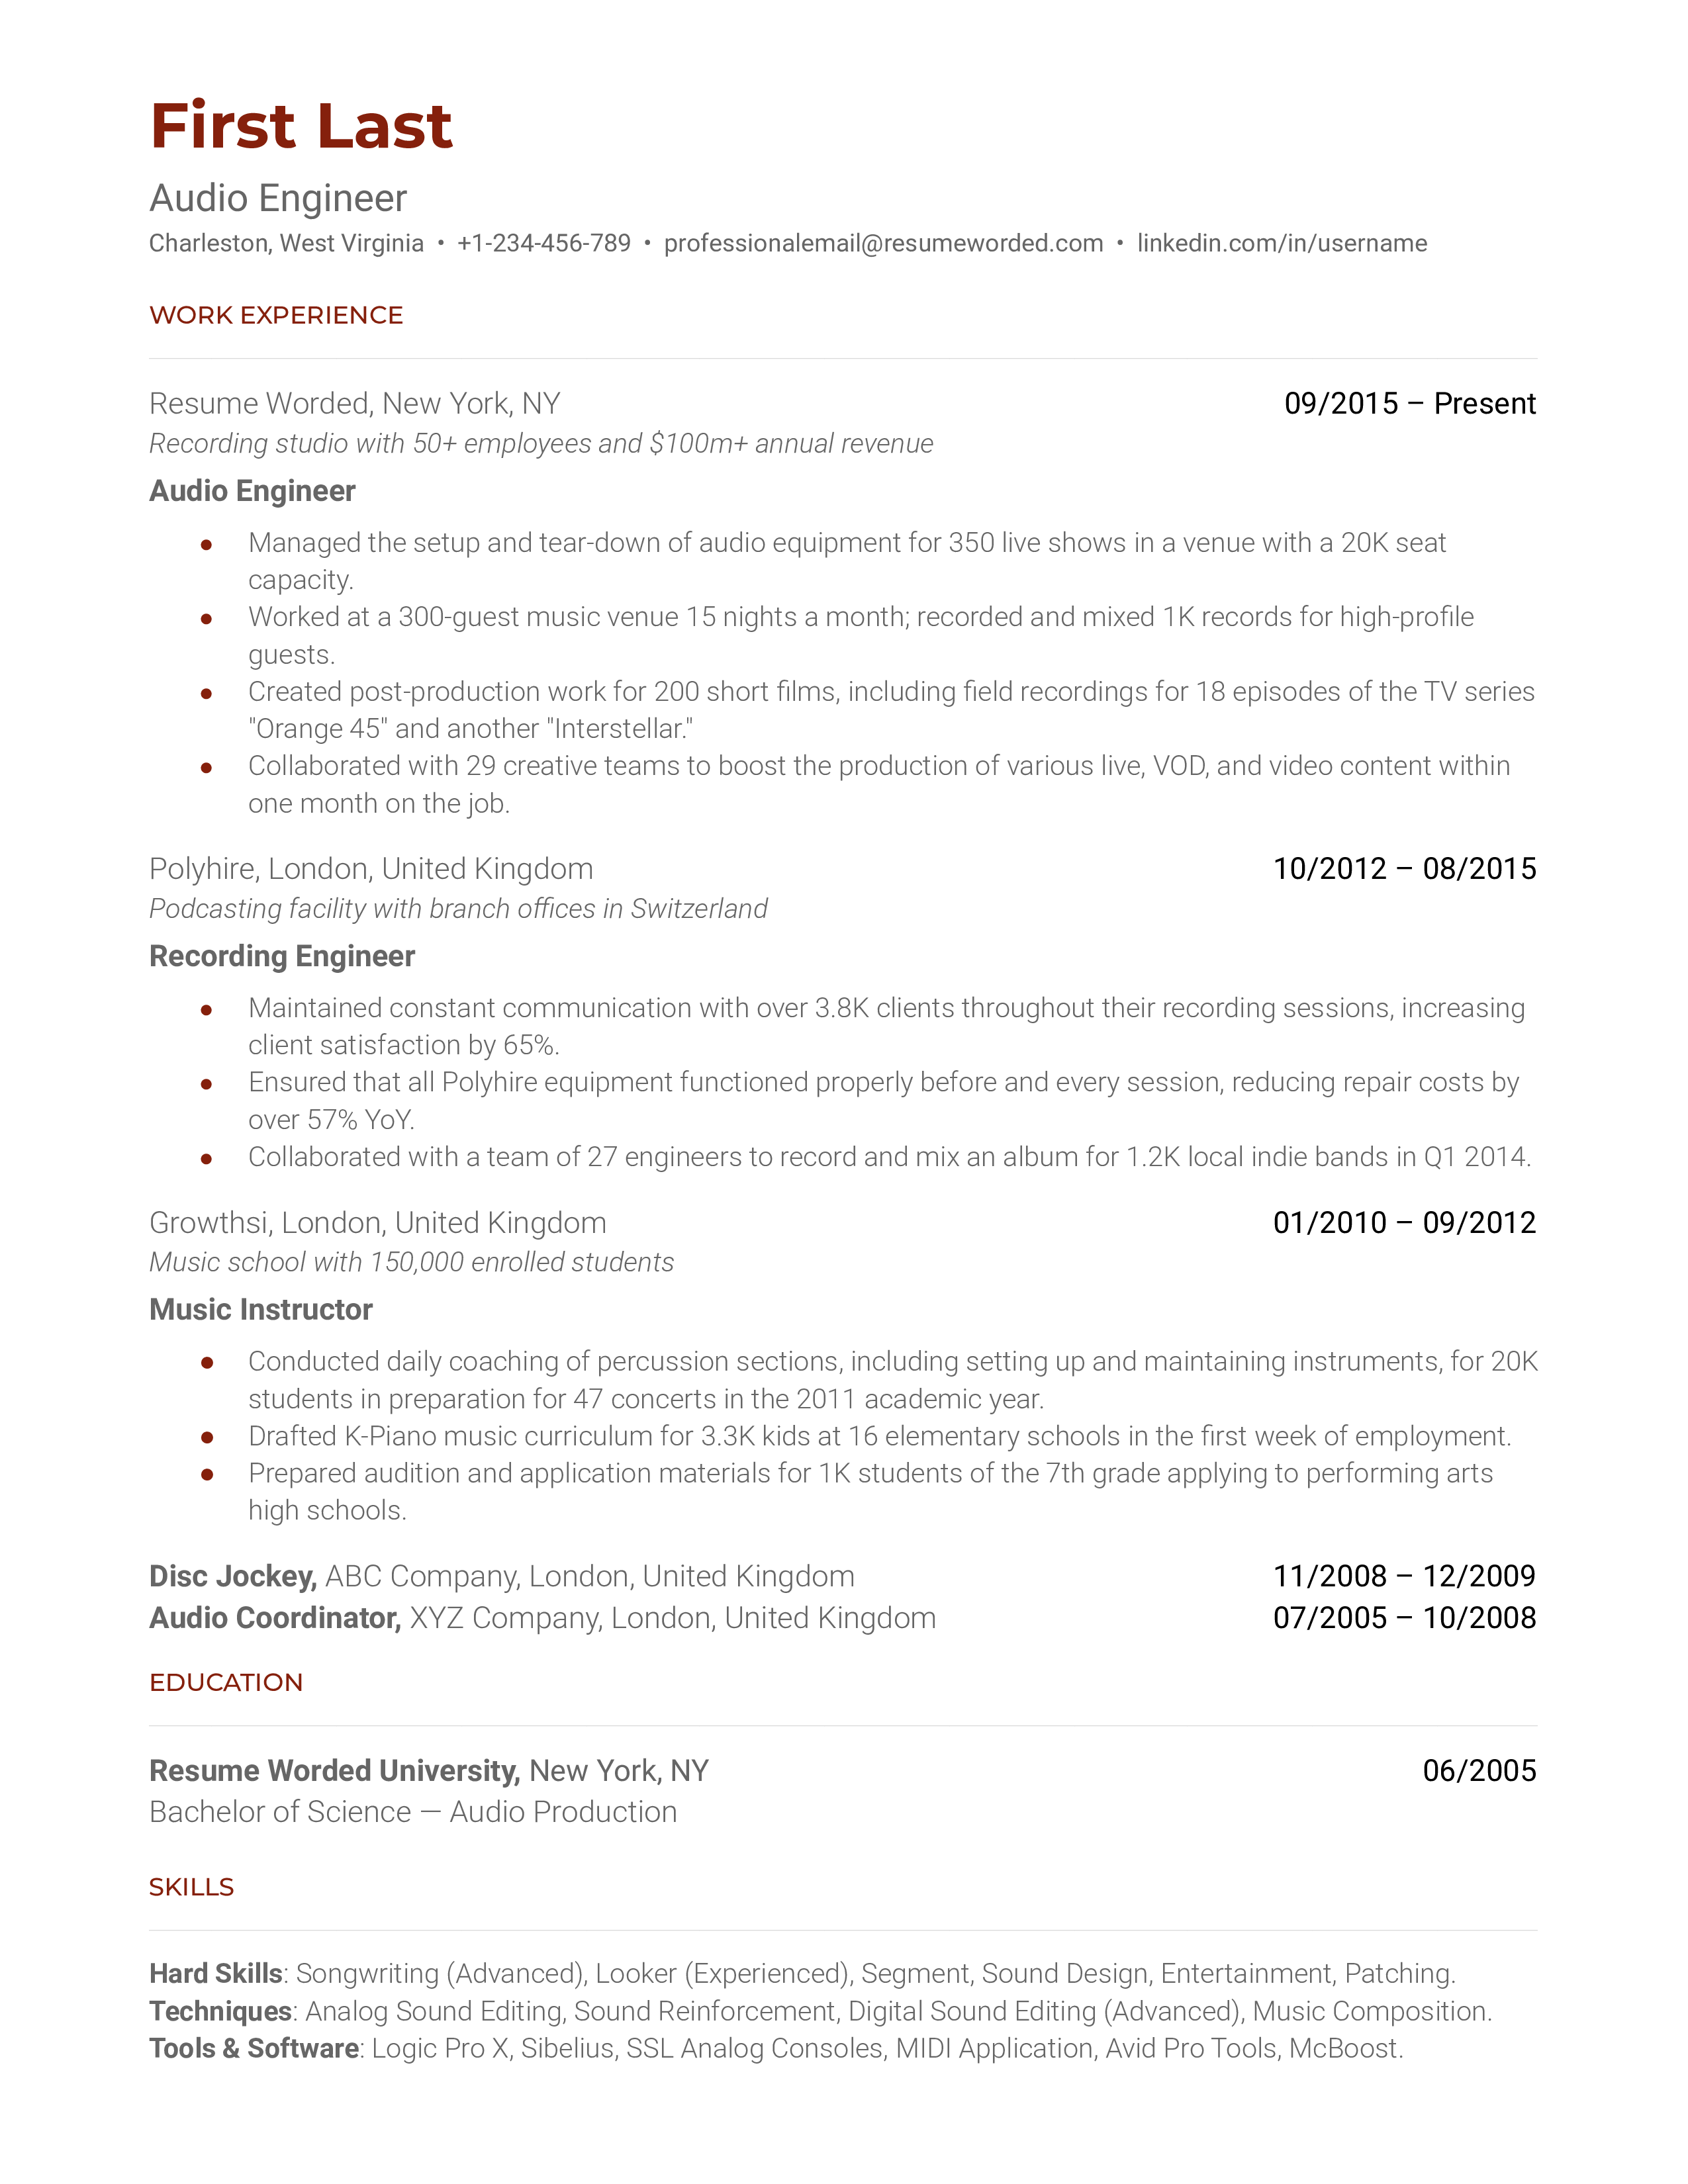  An audio engineer resume sample that highlights the applicant’s career progression and current tools list.